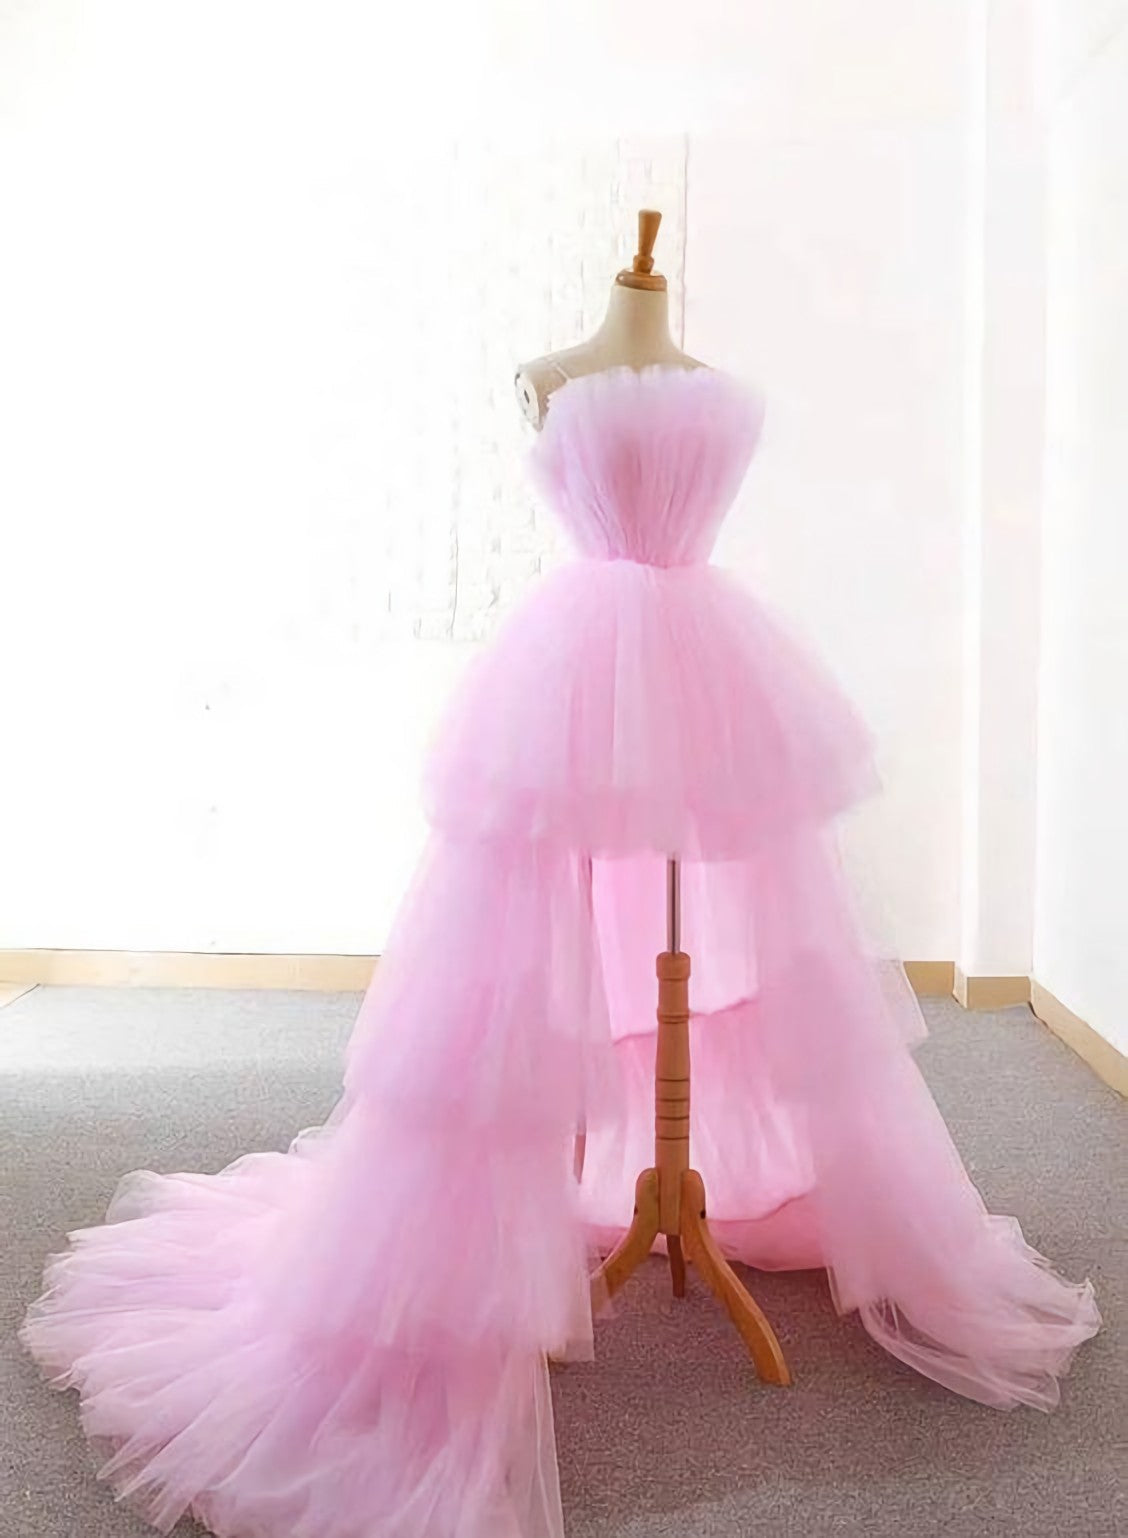 New Arrival High Low Pink Corset Prom Dresses, With Ruched Evening Dresses outfit, Homecoming Dress Beautiful